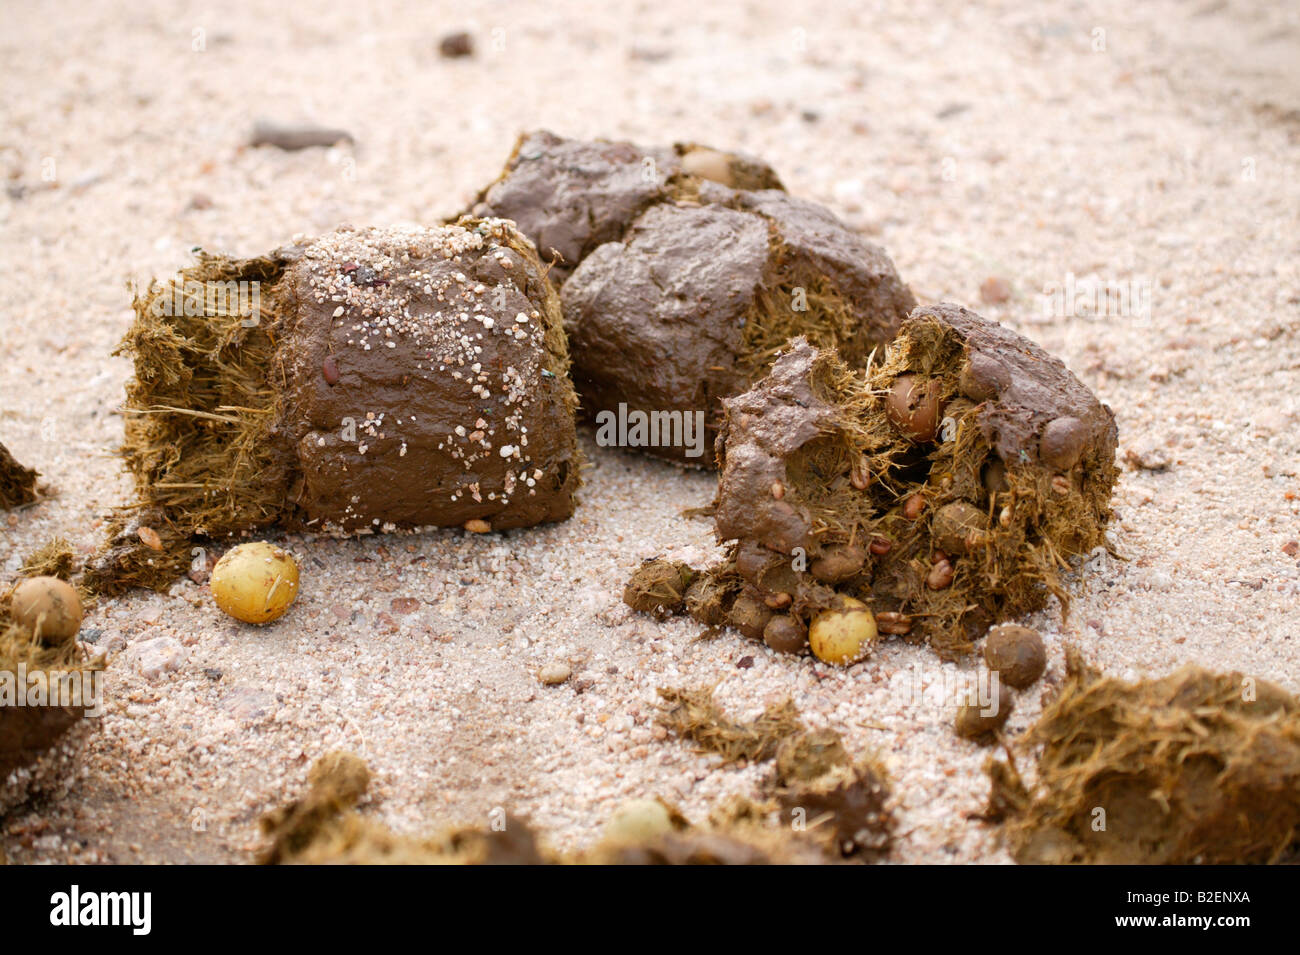 Fresh elephant dung with partially digested marula fruit Stock Photo